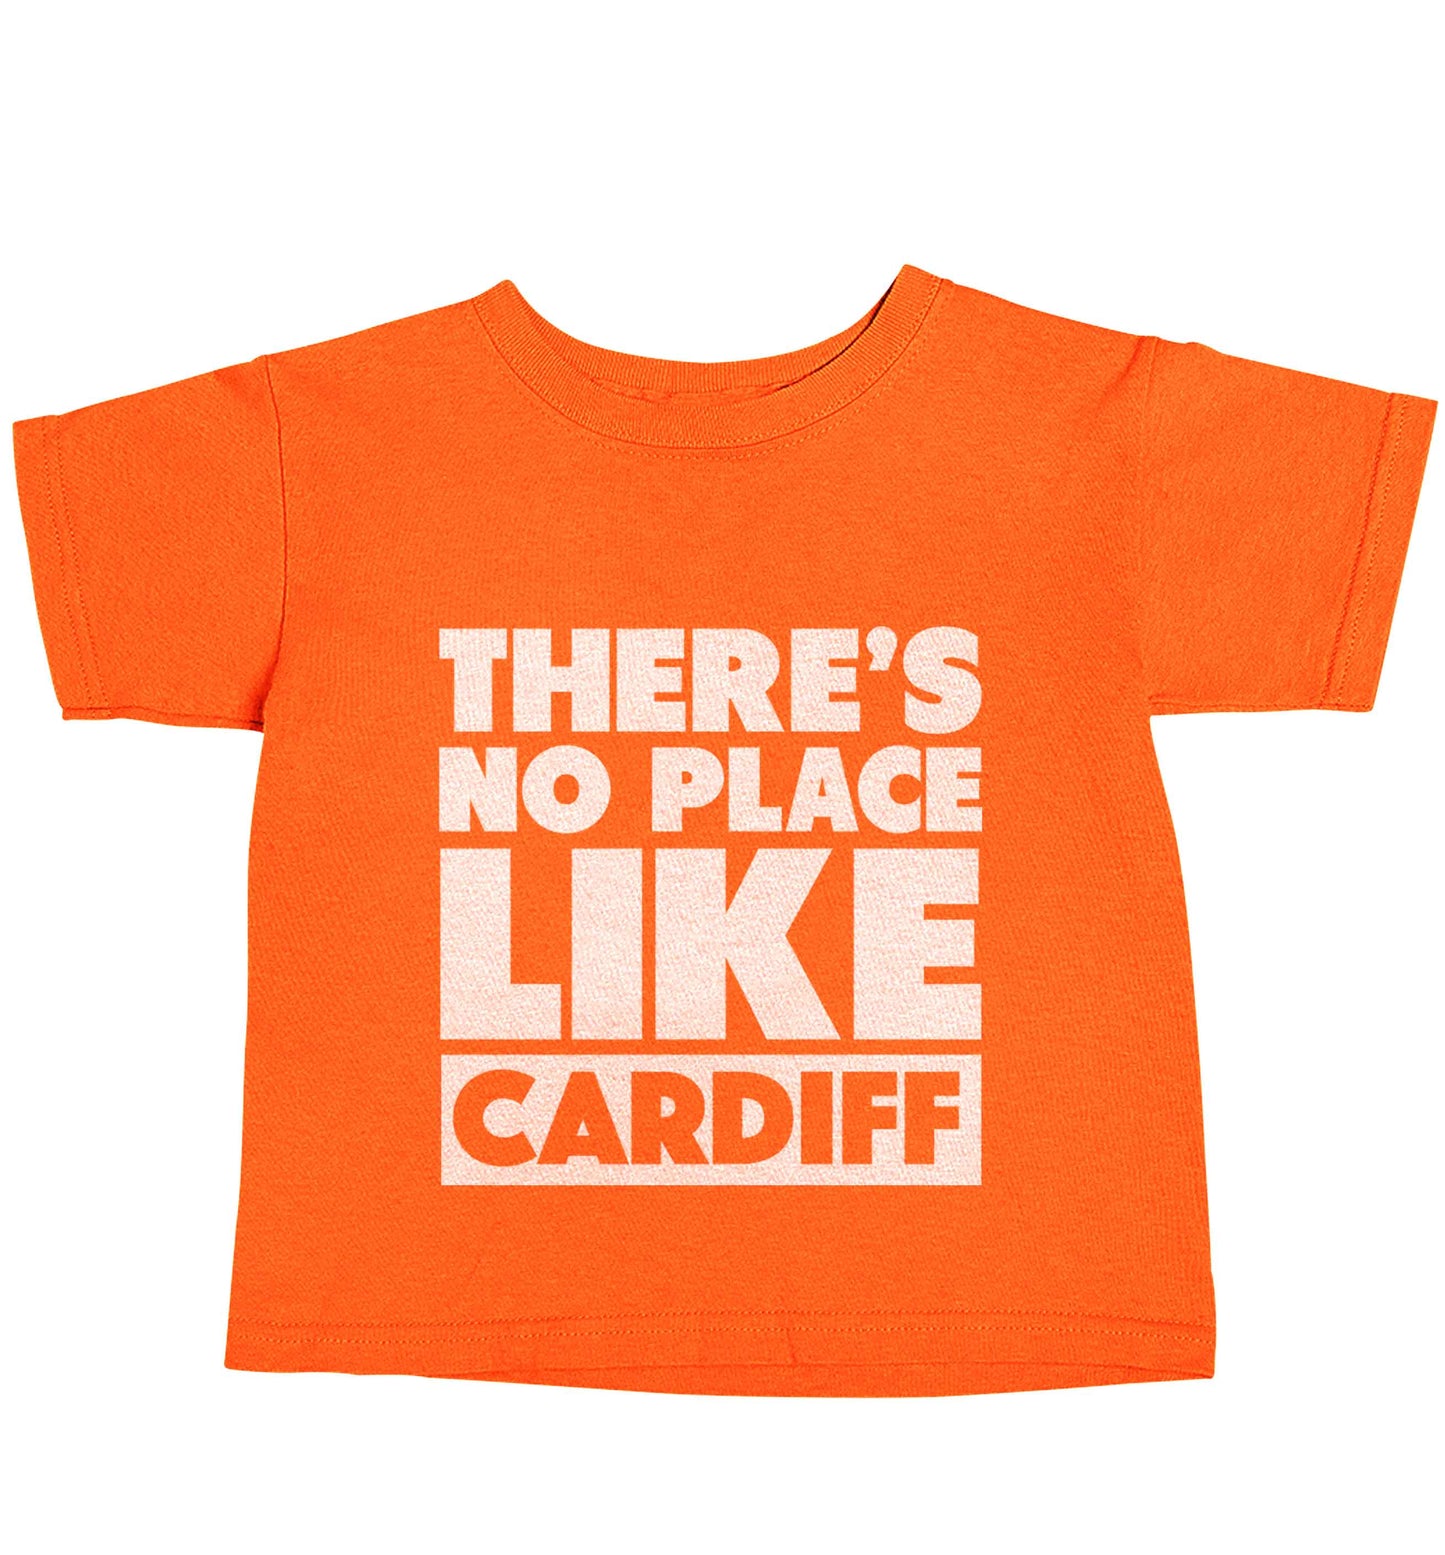 There's no place like Cardiff orange baby toddler Tshirt 2 Years